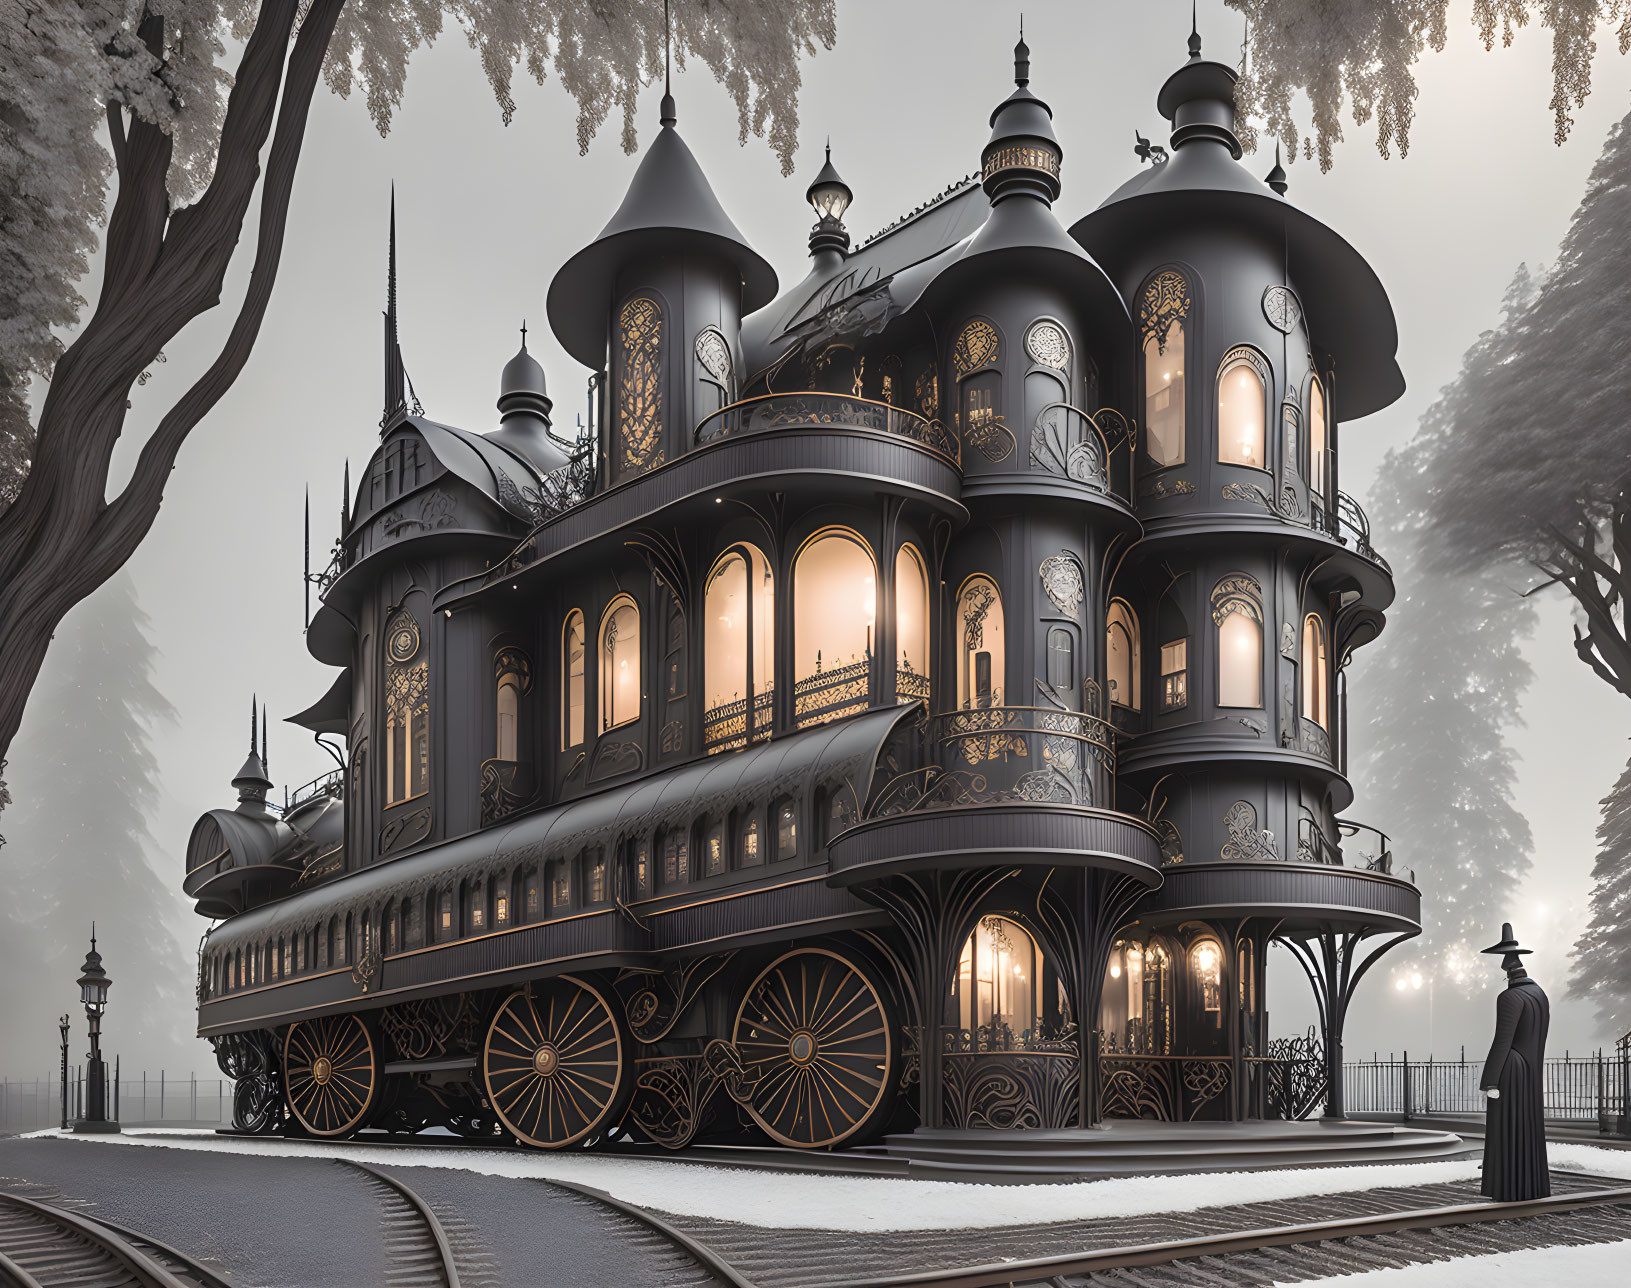 Victorian-Style House and Steam Locomotive Merge in Foggy Scene